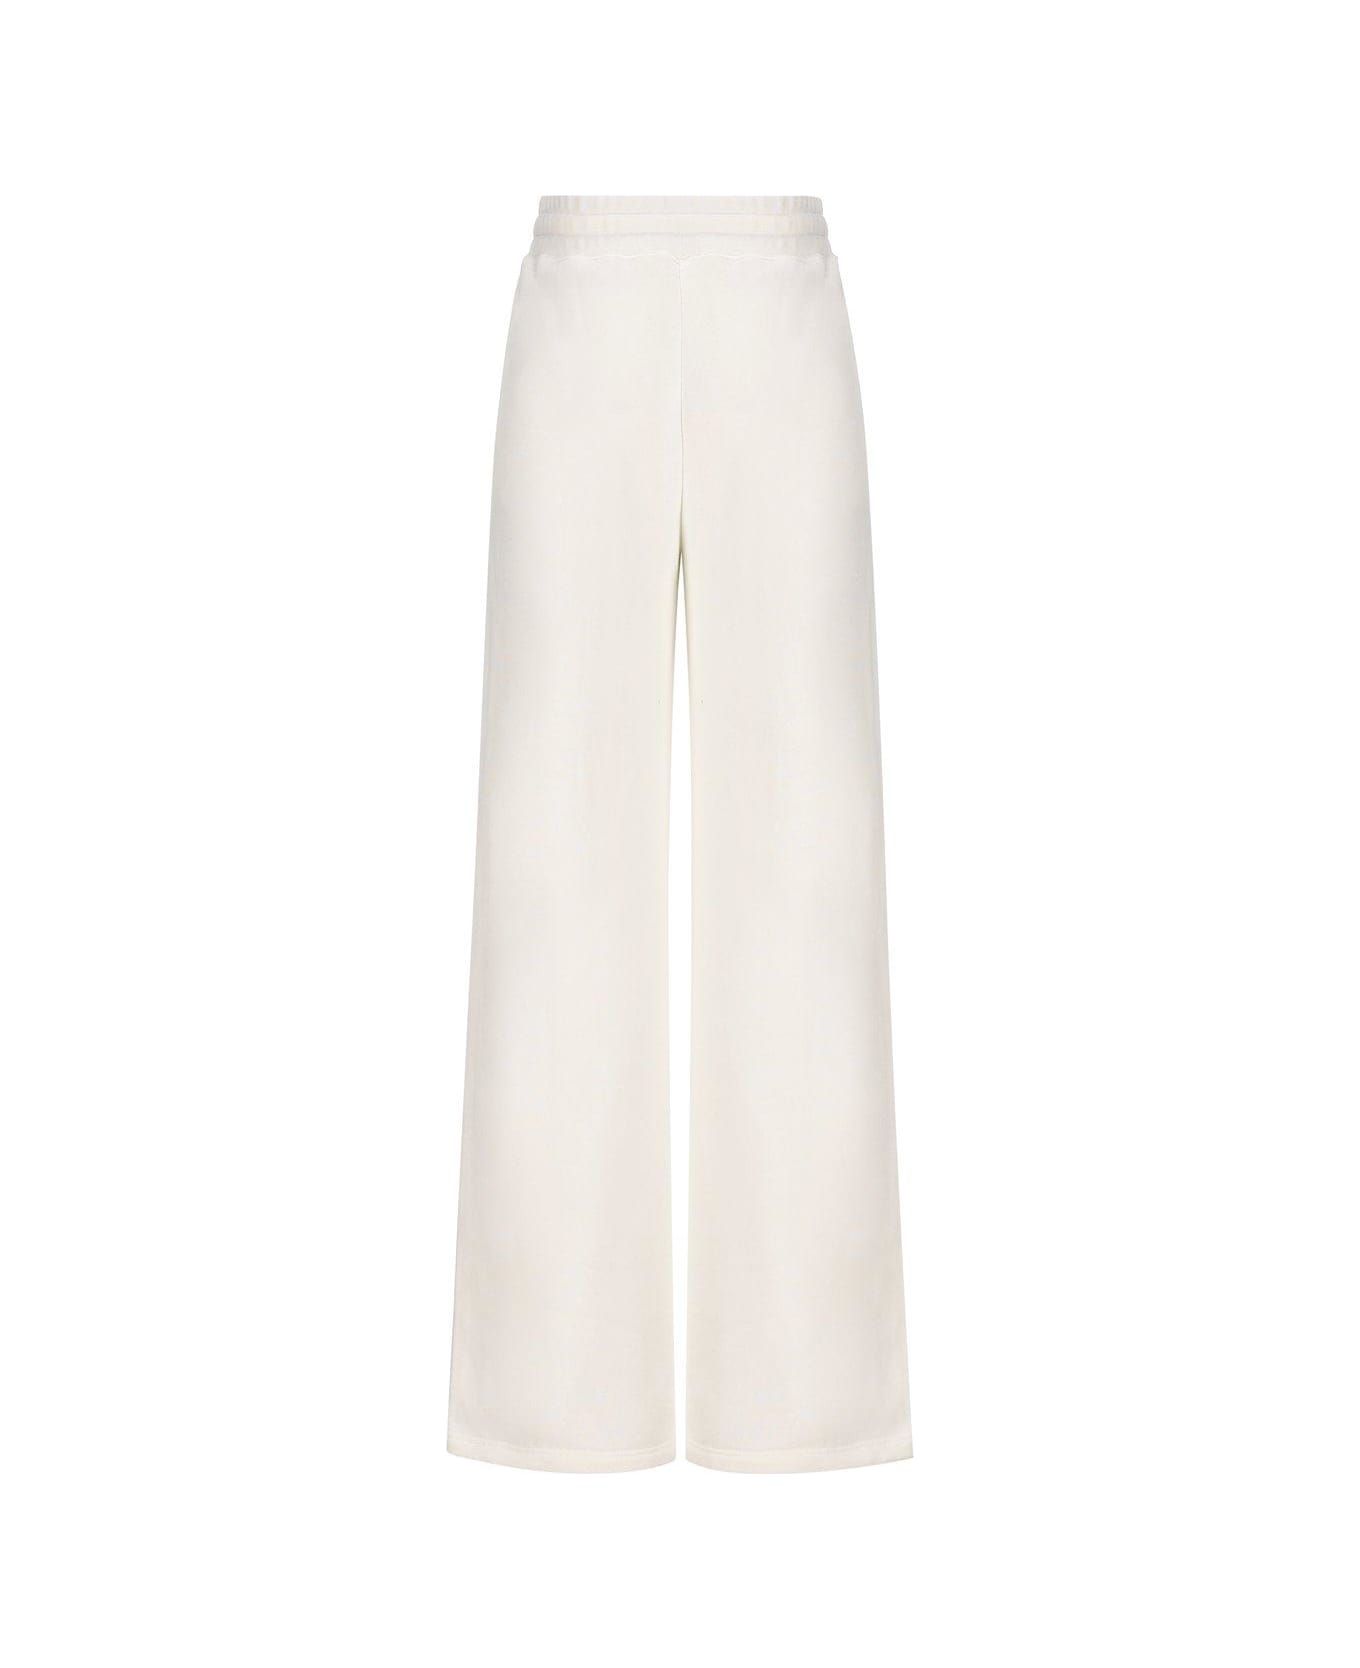 Gucci Interlocking G Embroidered Jersey Trousers - White ボトムス